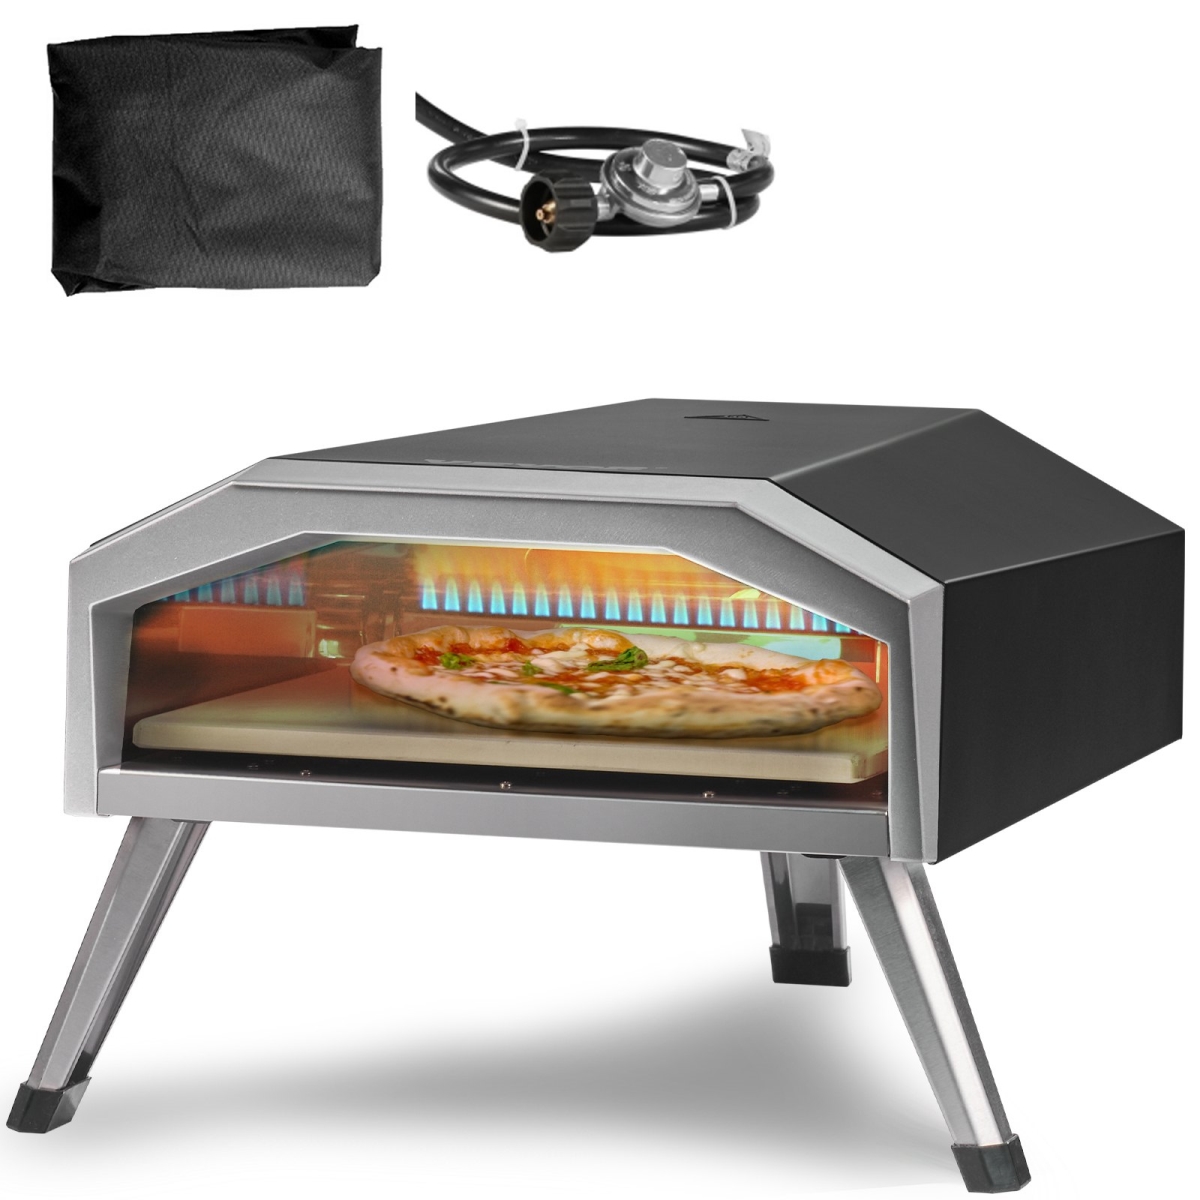 Picture of Vevor BXSPSLYCMBRQH5V9DV0 13 in. Outdoor Gas Pizza Oven